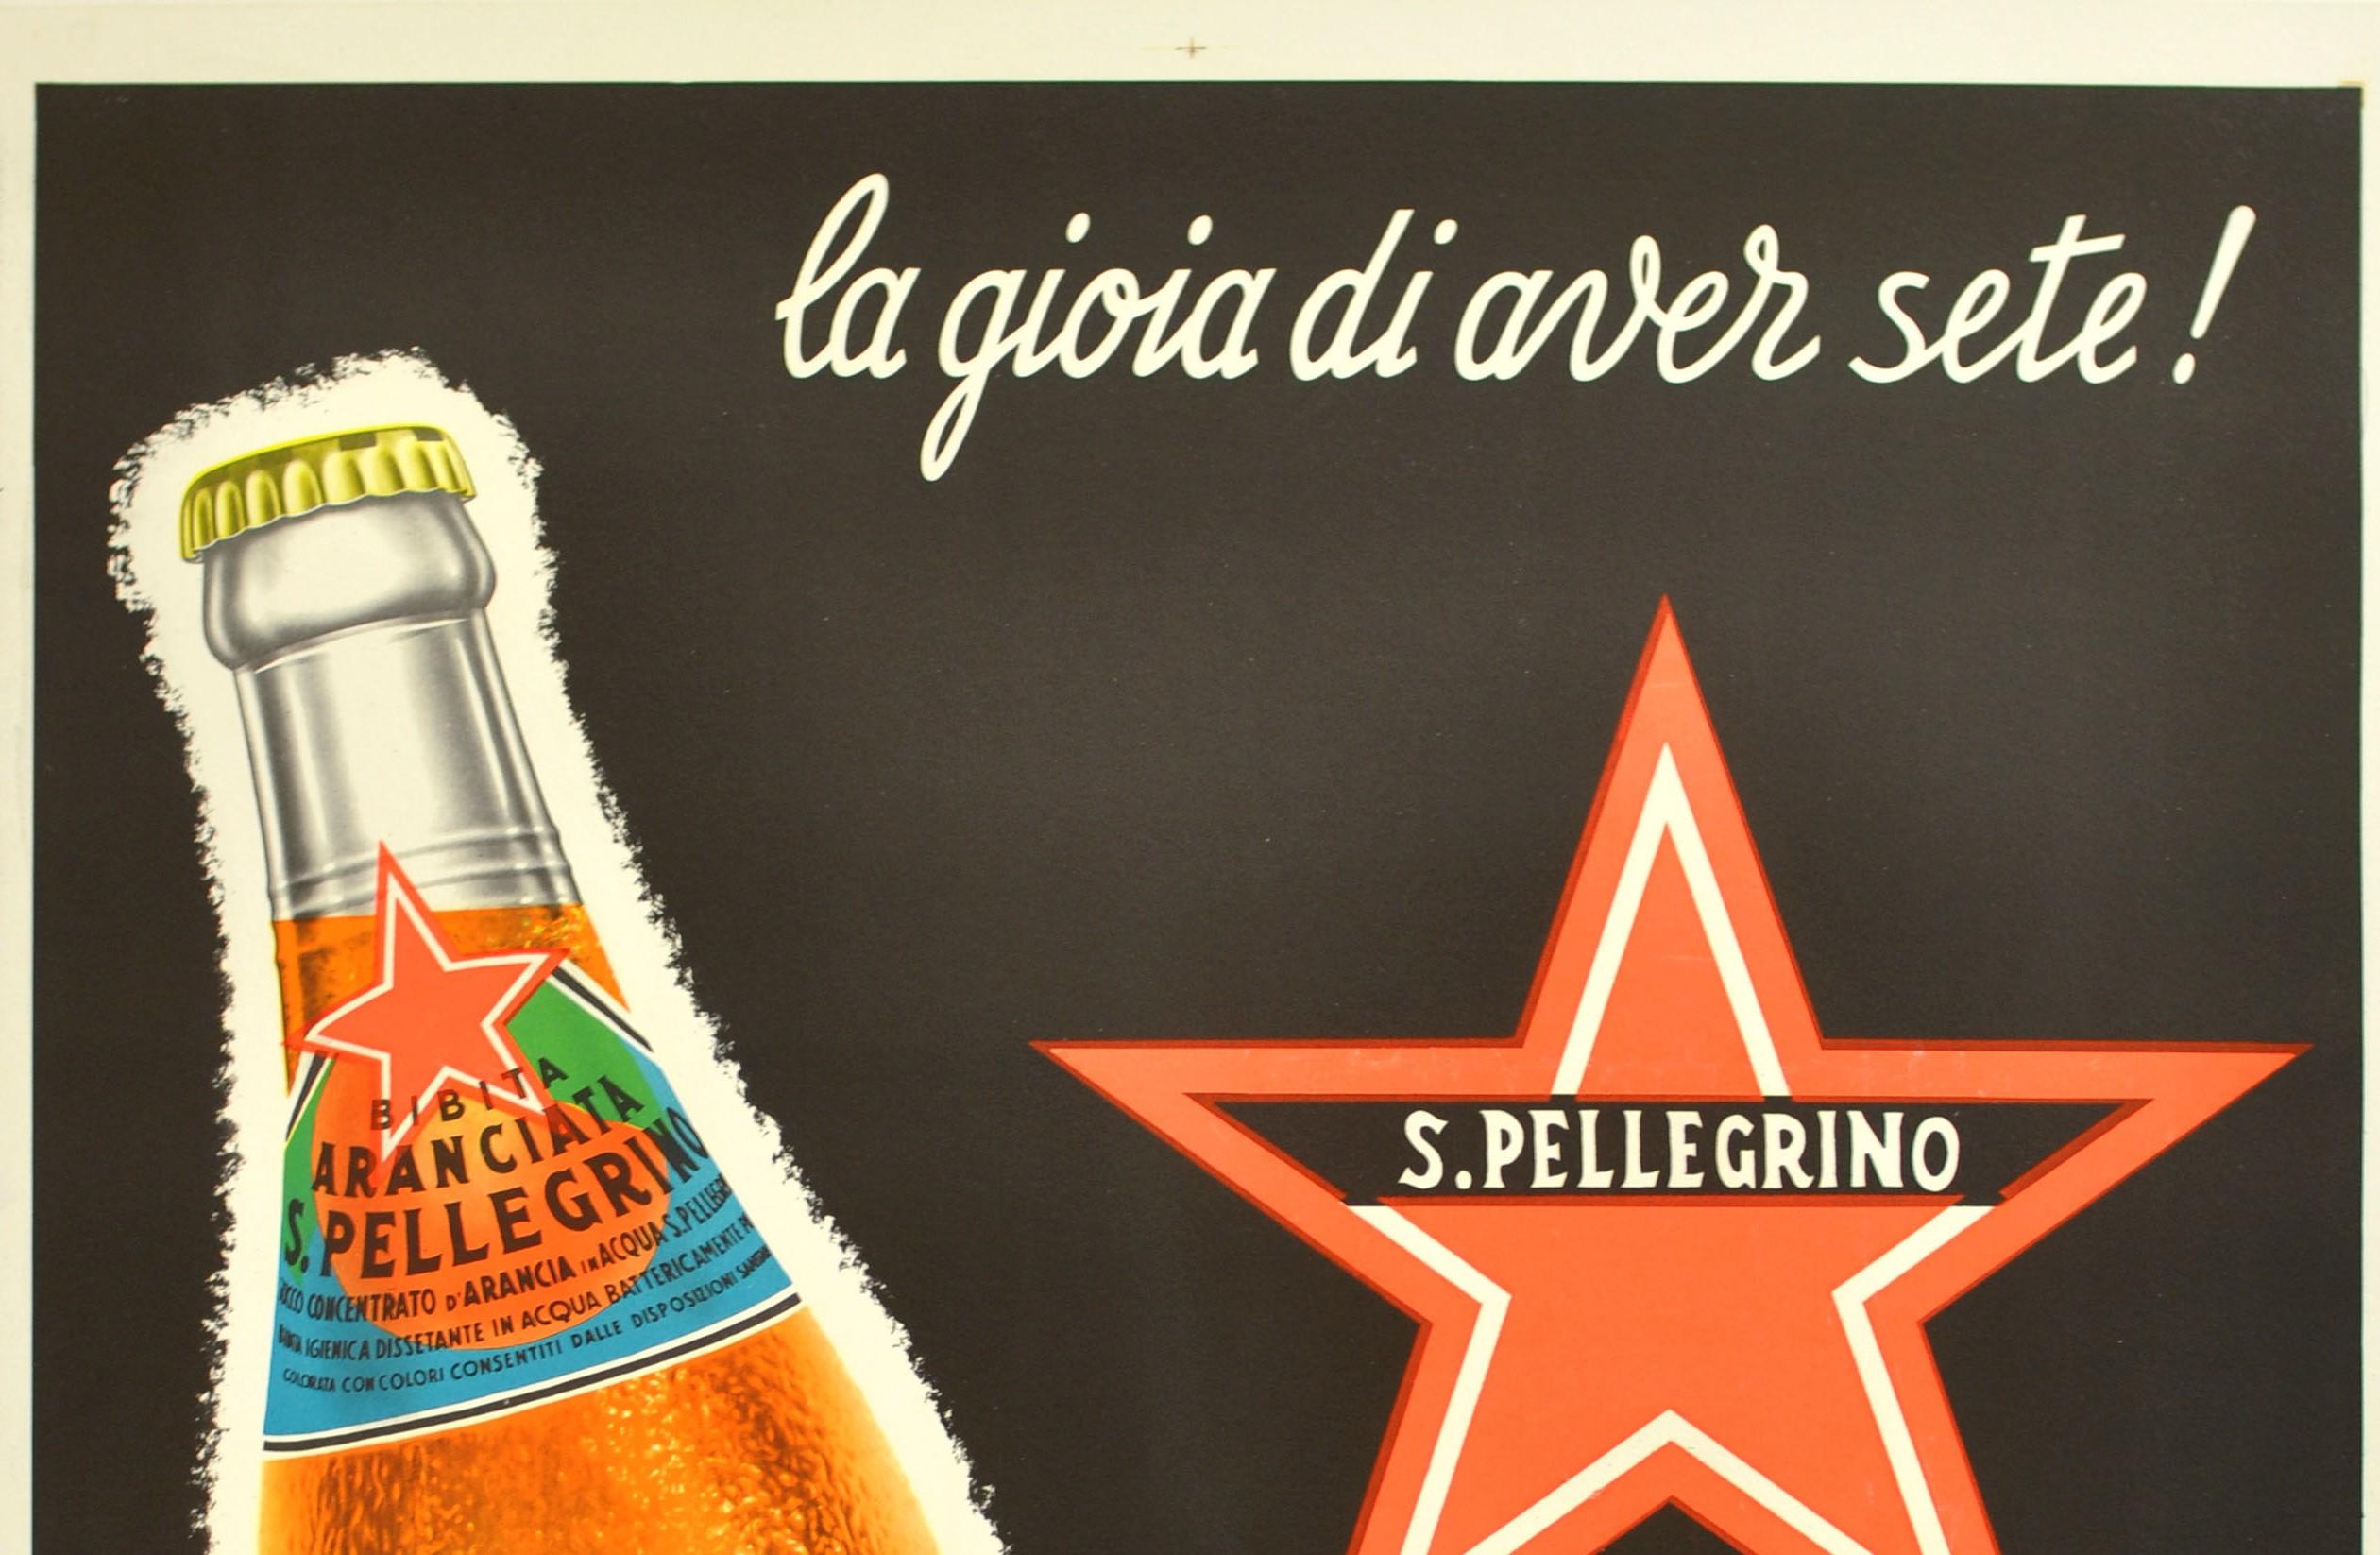 Large original vintage advertising poster for a popular and iconic drink, Aranciata S. Pellegrino. The joy of being thirsty! - La gioia di aver sete! Bold and colourful image on a black background of a bottle of drink with a bright logo and text.